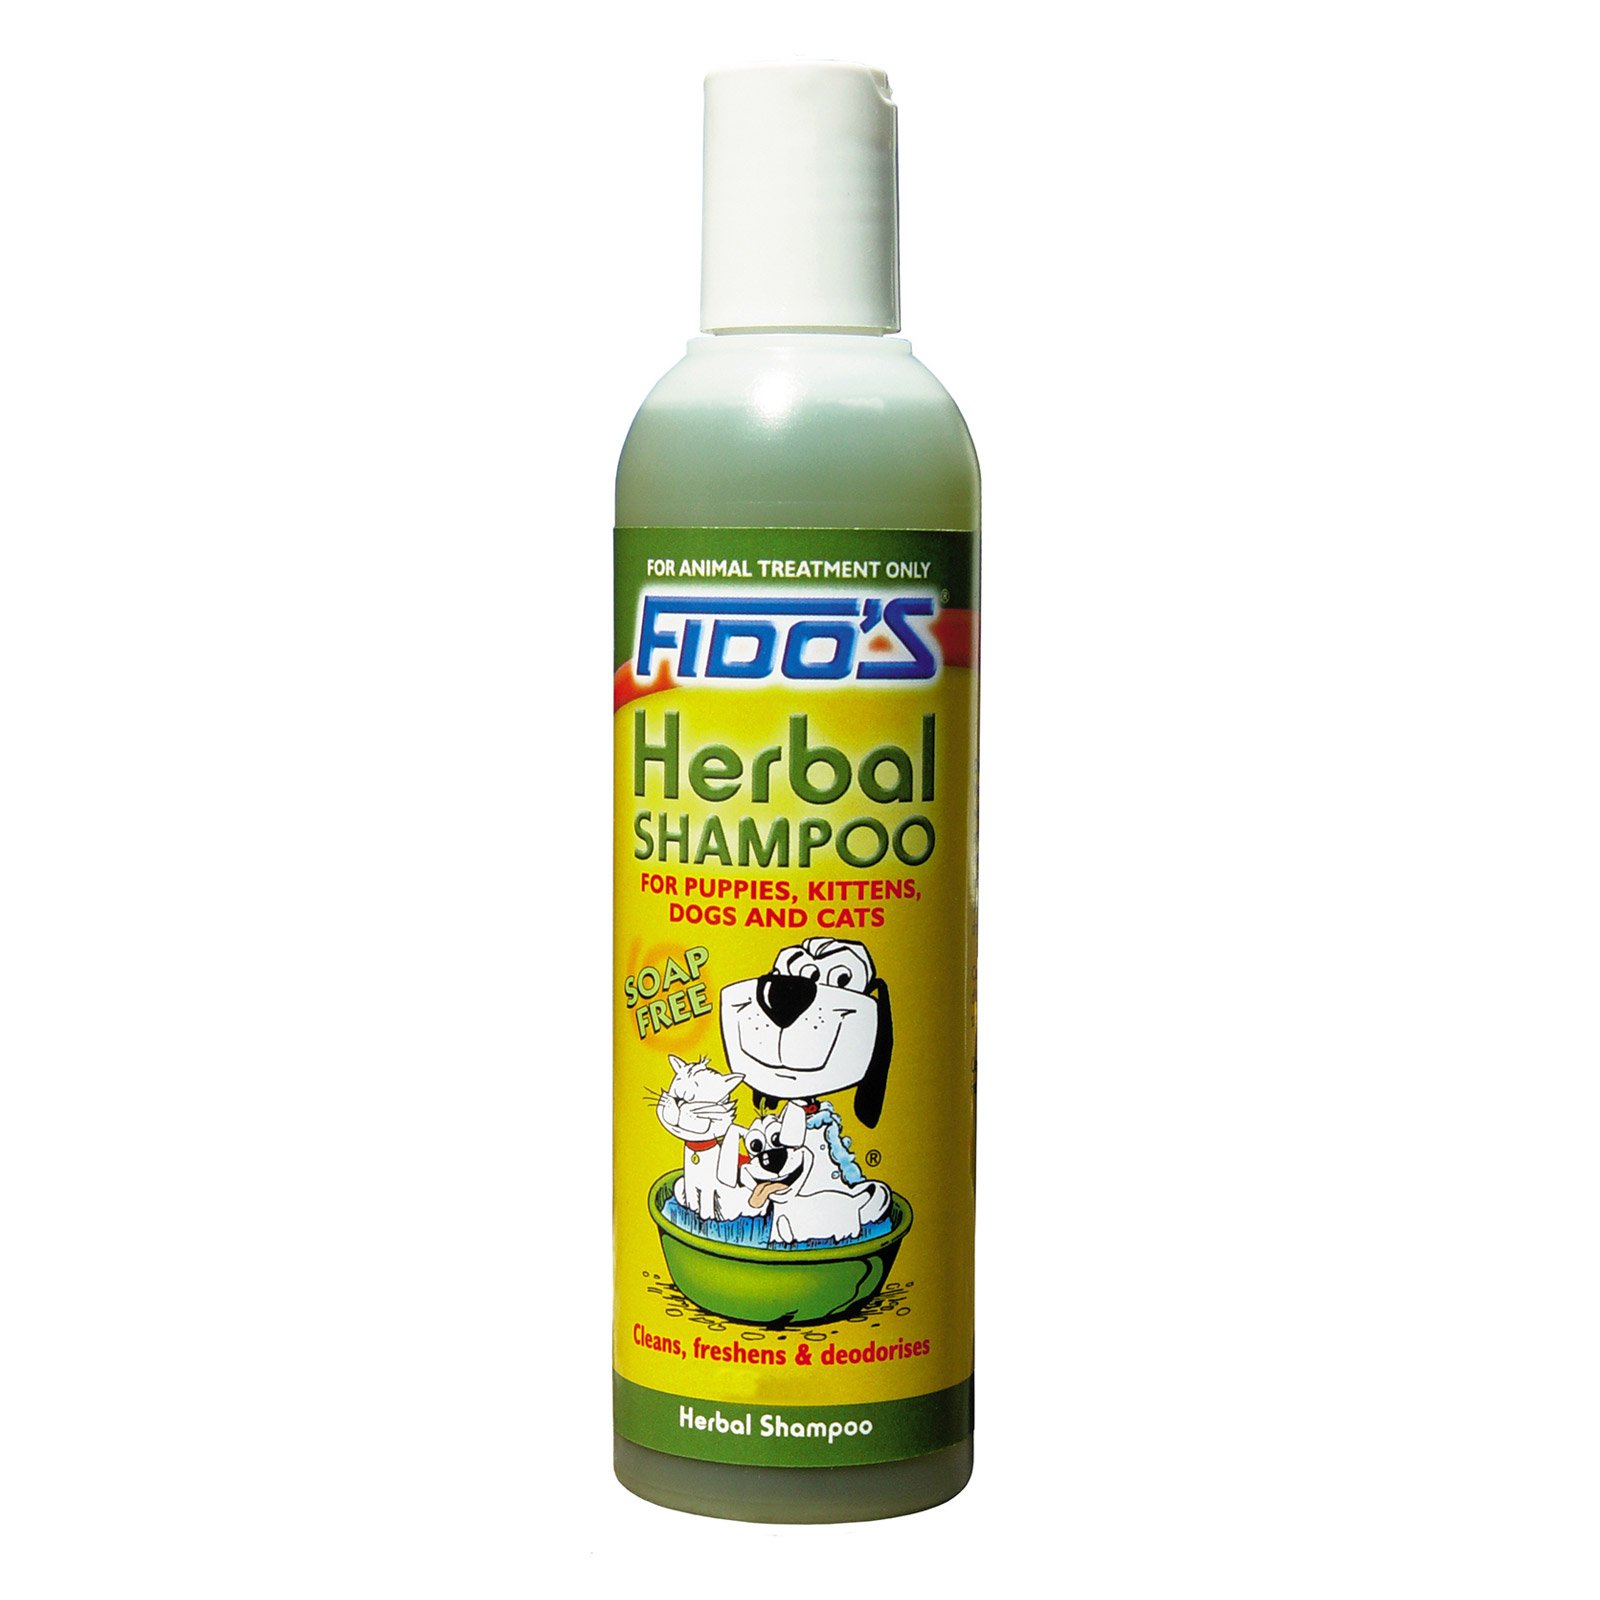 Fido's Herbal Shampoo For Dogs